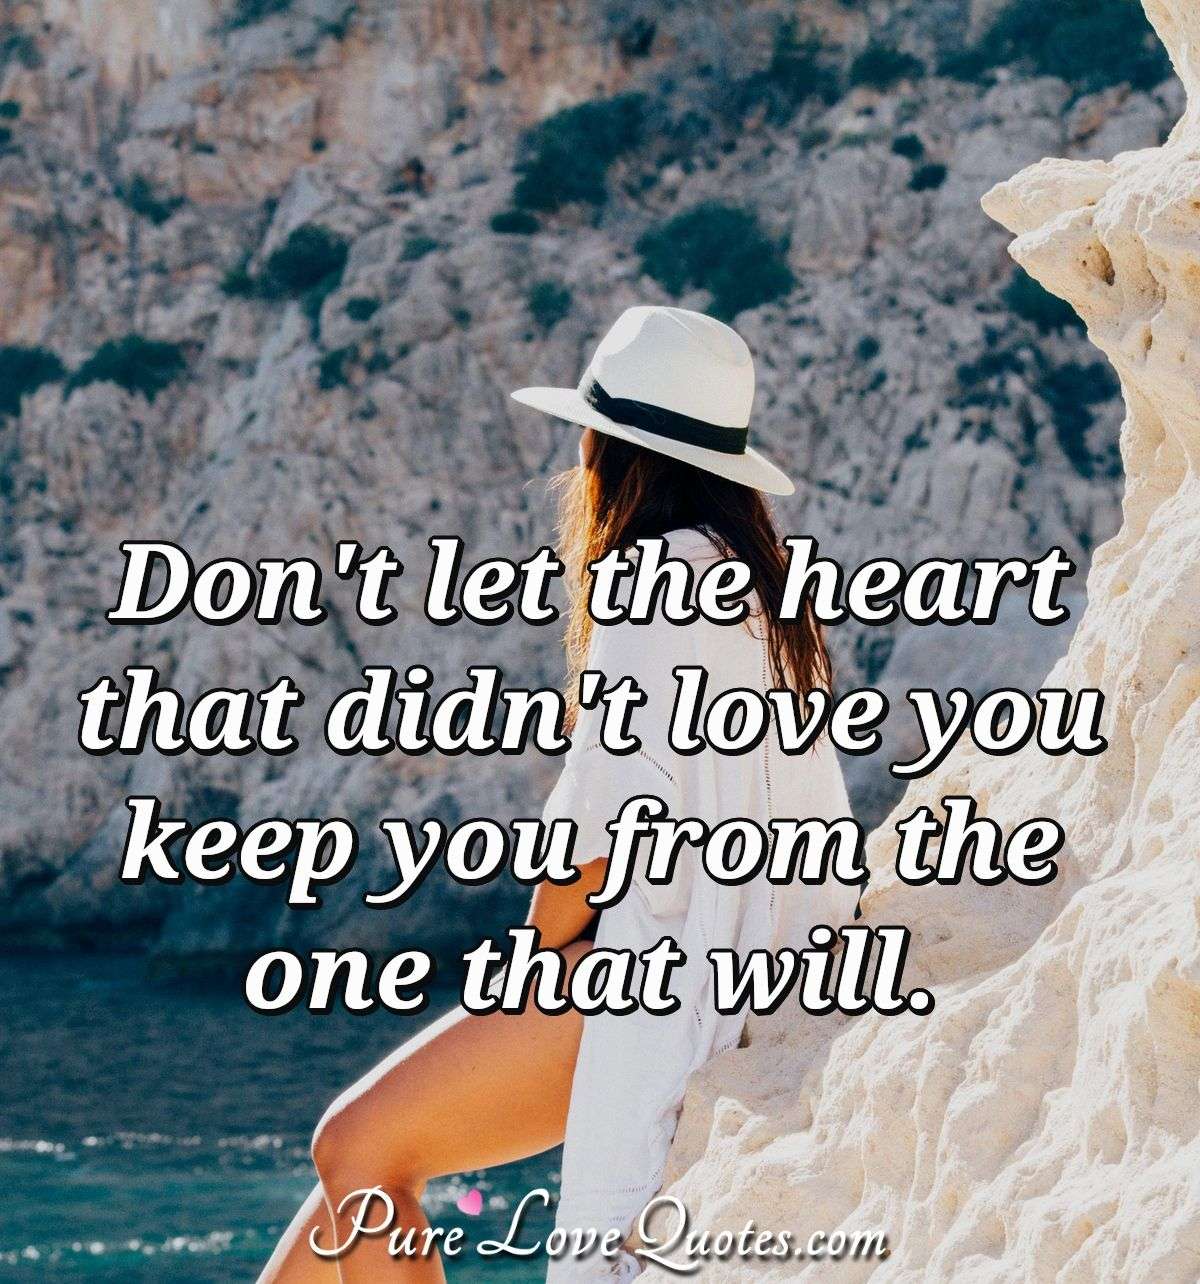 Don't let the heart that didn't love you keep you from the one that will. - Anonymous